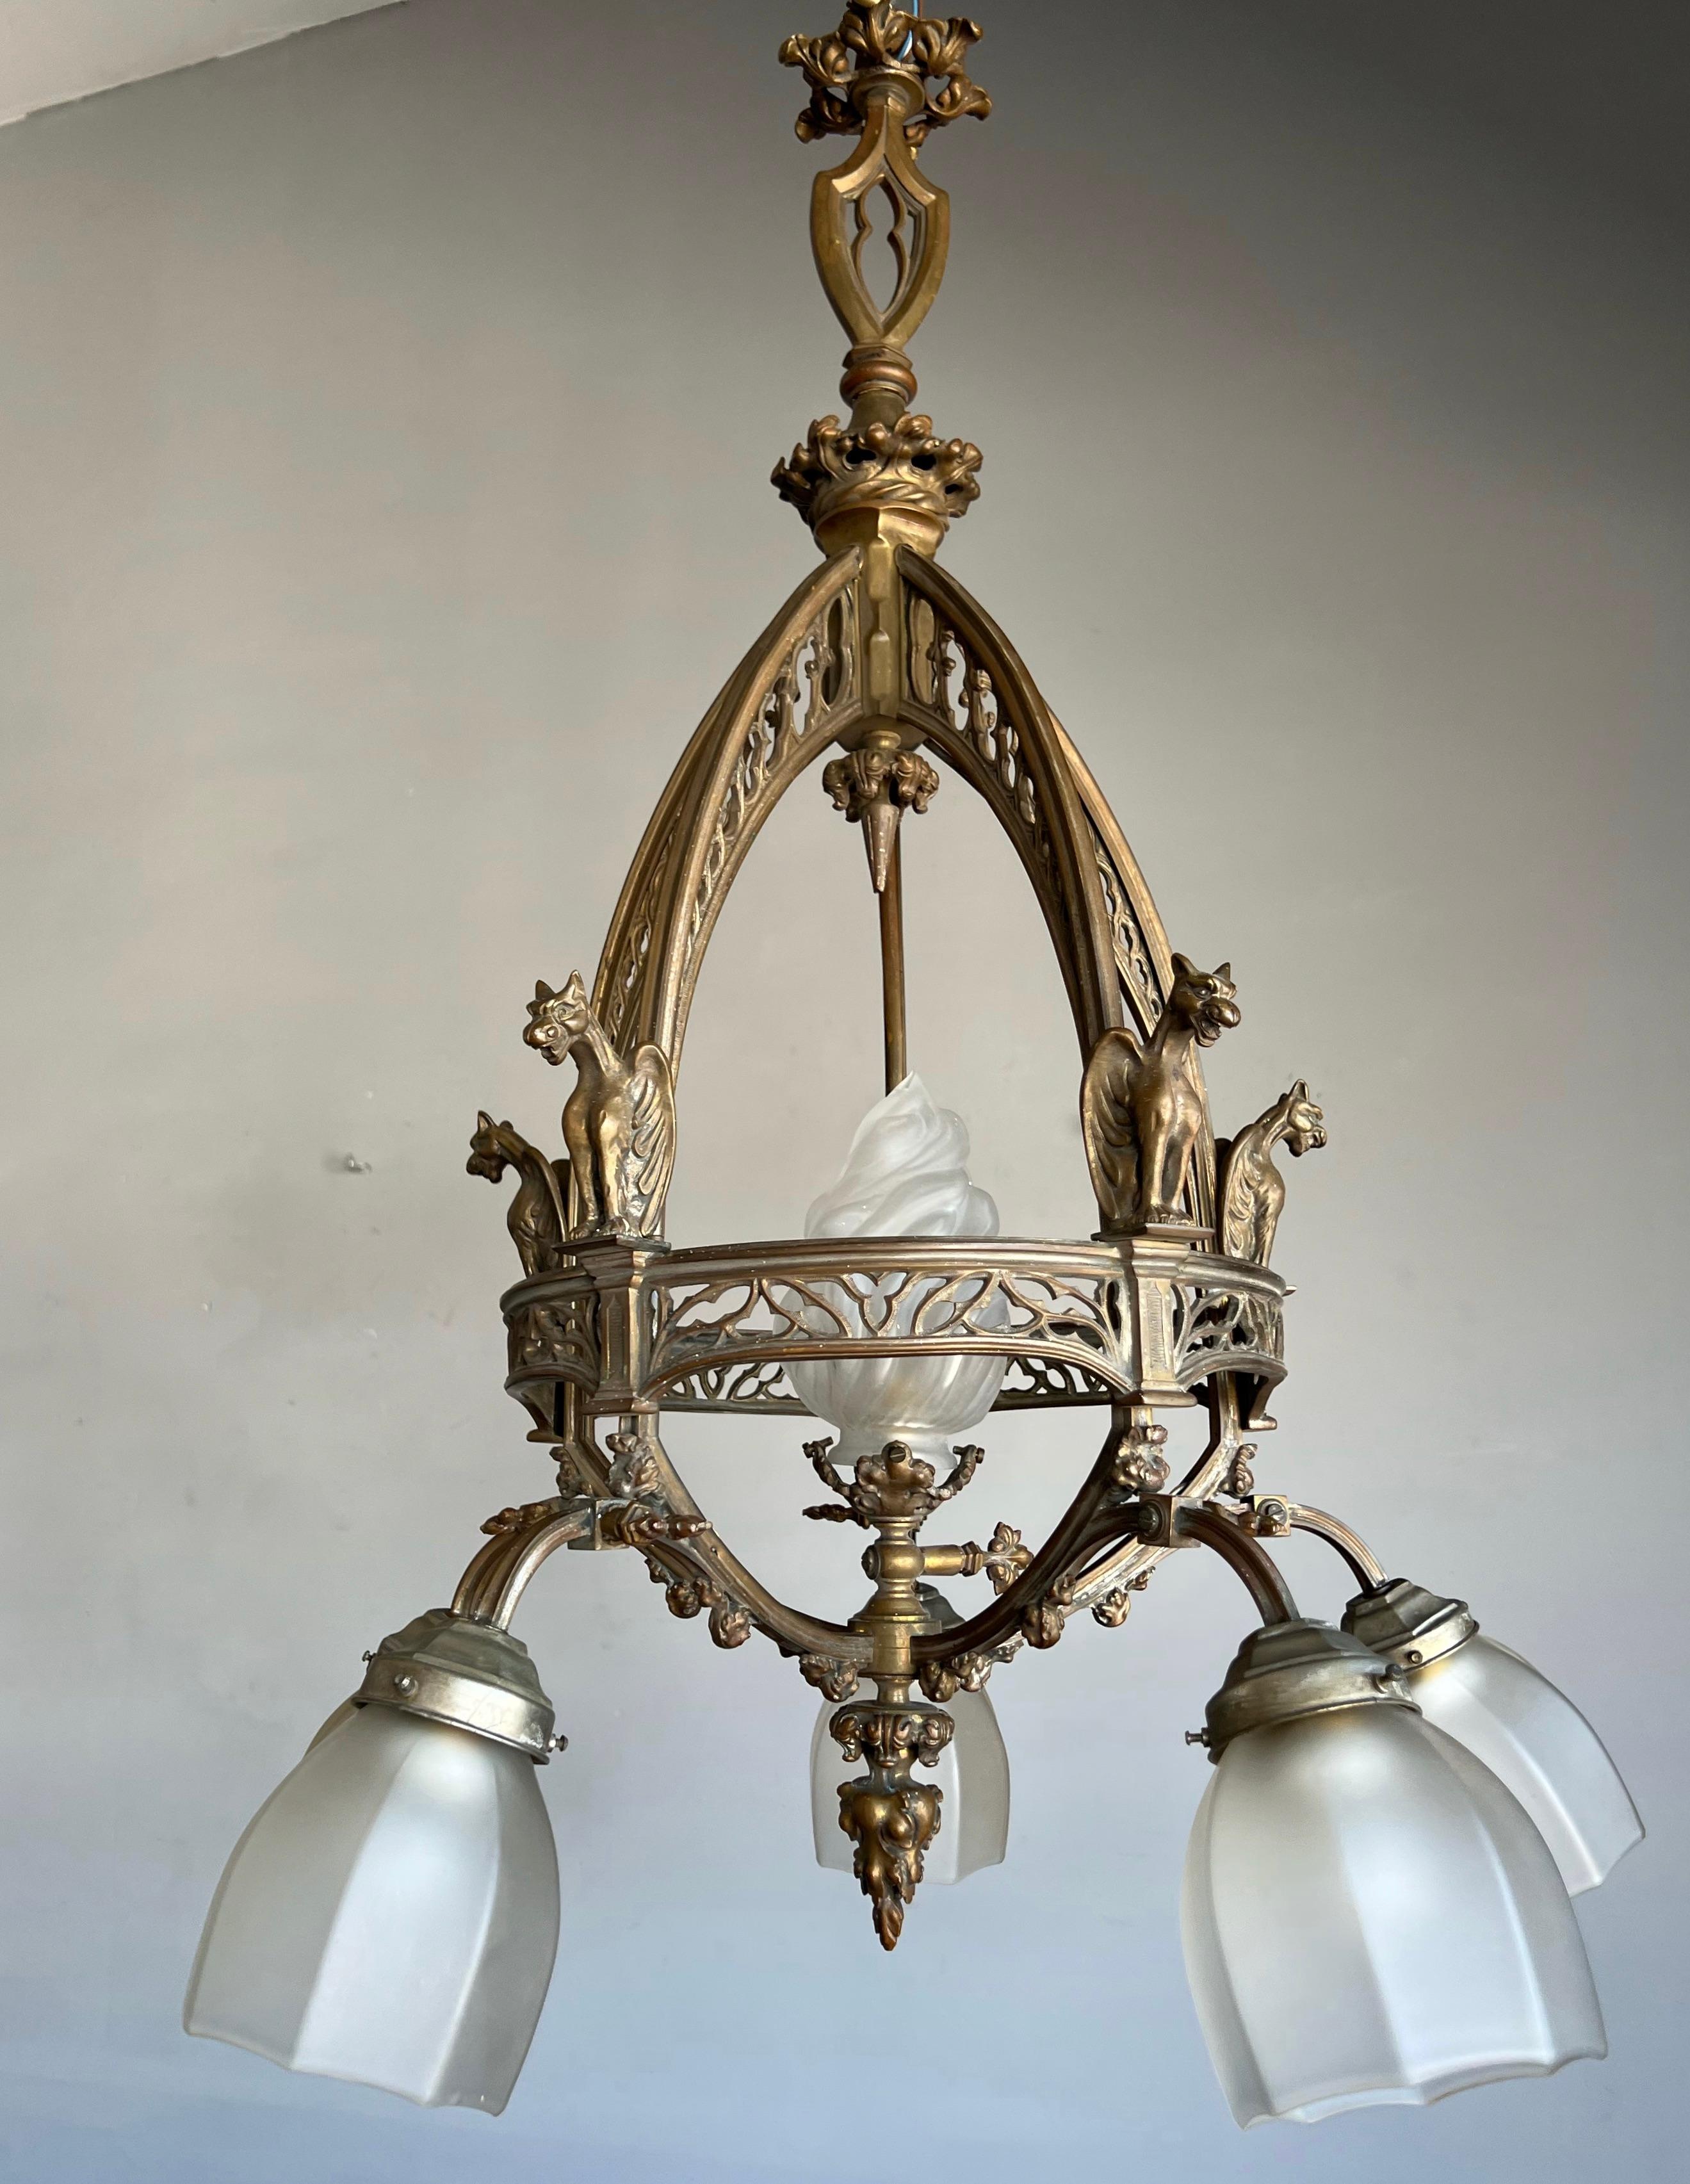 This monumental and architectural church fixture could be the perfect addition to your Gothic collection or interior.

If you appreciate the history and beauty of the French Gothic style then this amazing light fixture from the late 1800s could be